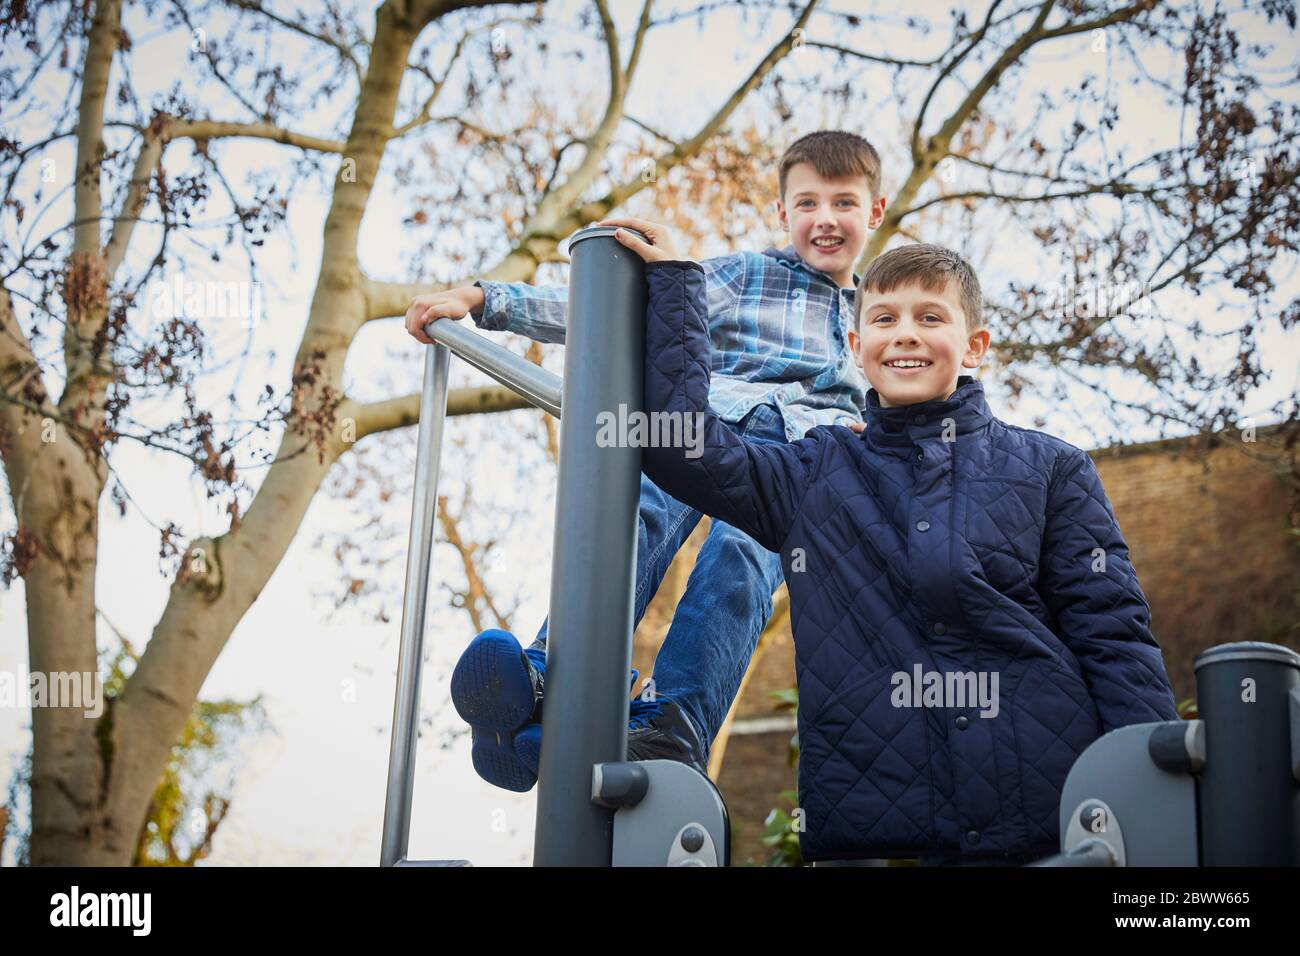 Two happy boys on the schoolyard playground during break time Stock Photo